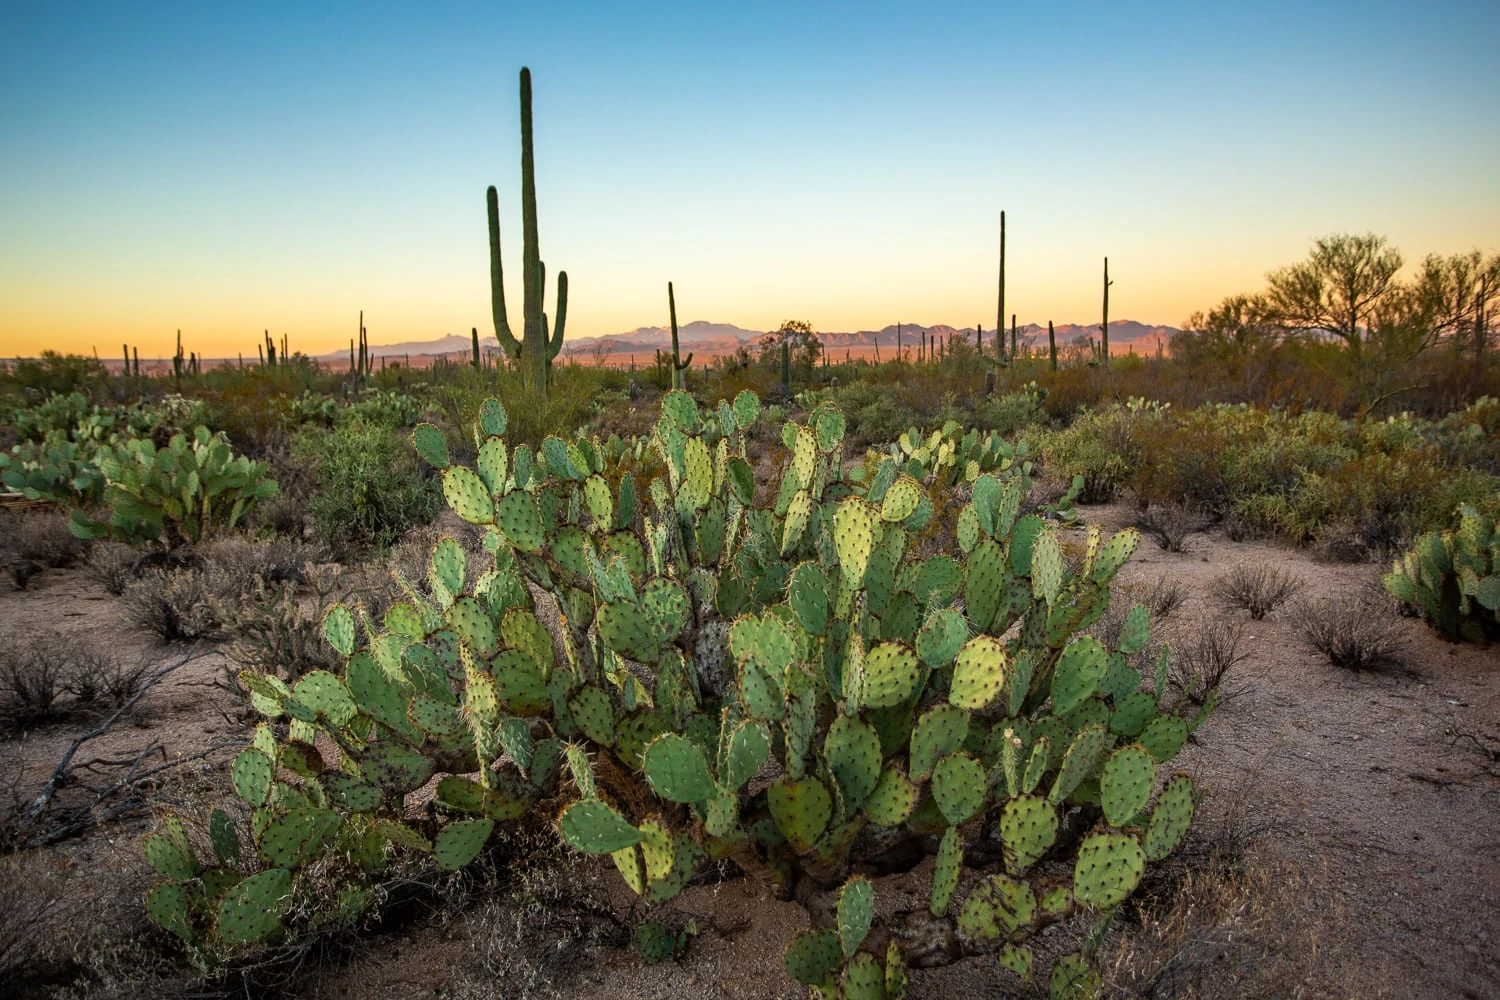 A prickly pear cactus in the foreground gives way to the large Saguaro cacti in the background against a pink and gold sunrise.